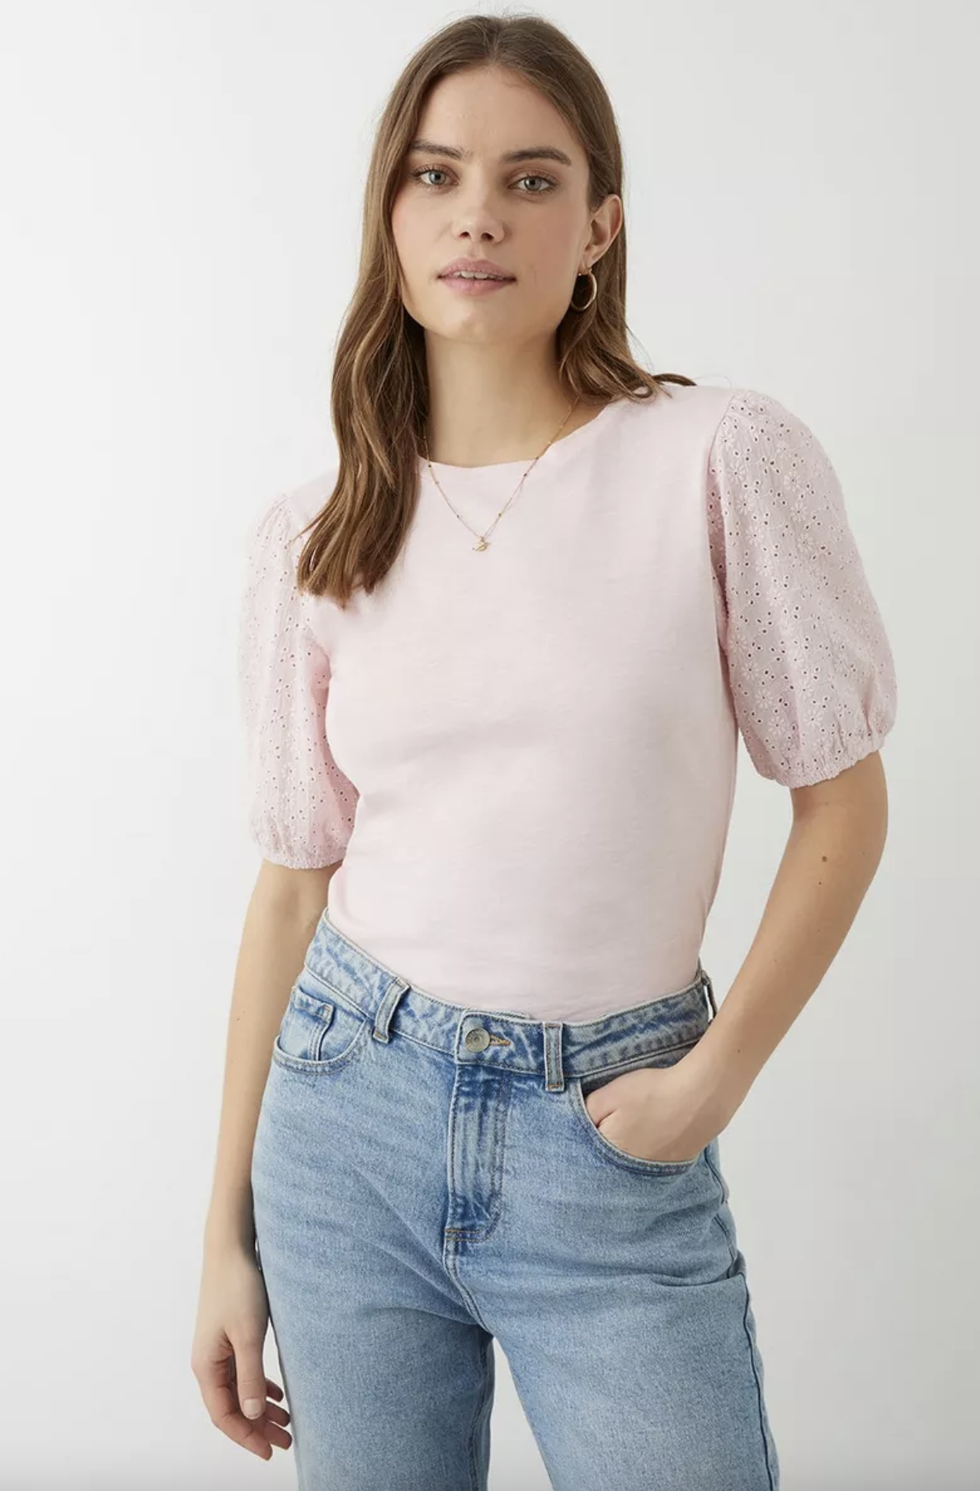 Best broderie anglaise top - Broderie blouses for summer